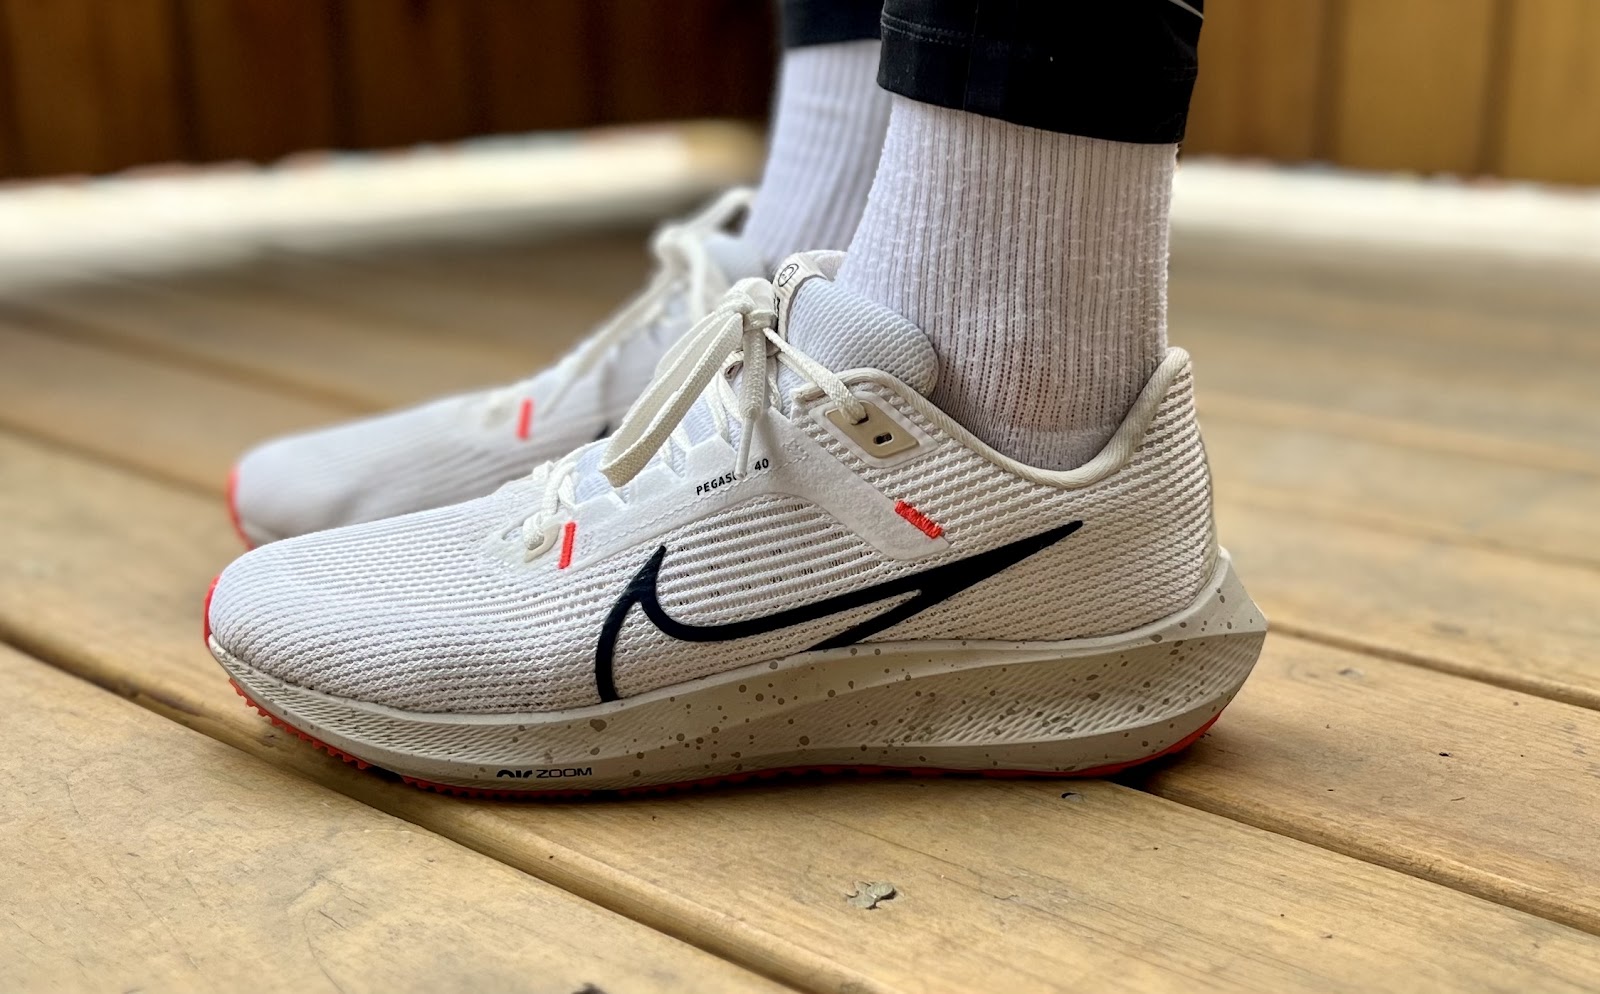 Dialoog Rouwen Hertellen Road Trail Run: Nike Air Zoom Pegasus 40 Multi Tester Review: True to its  Ride Tradition, Modern in Looks and Fit